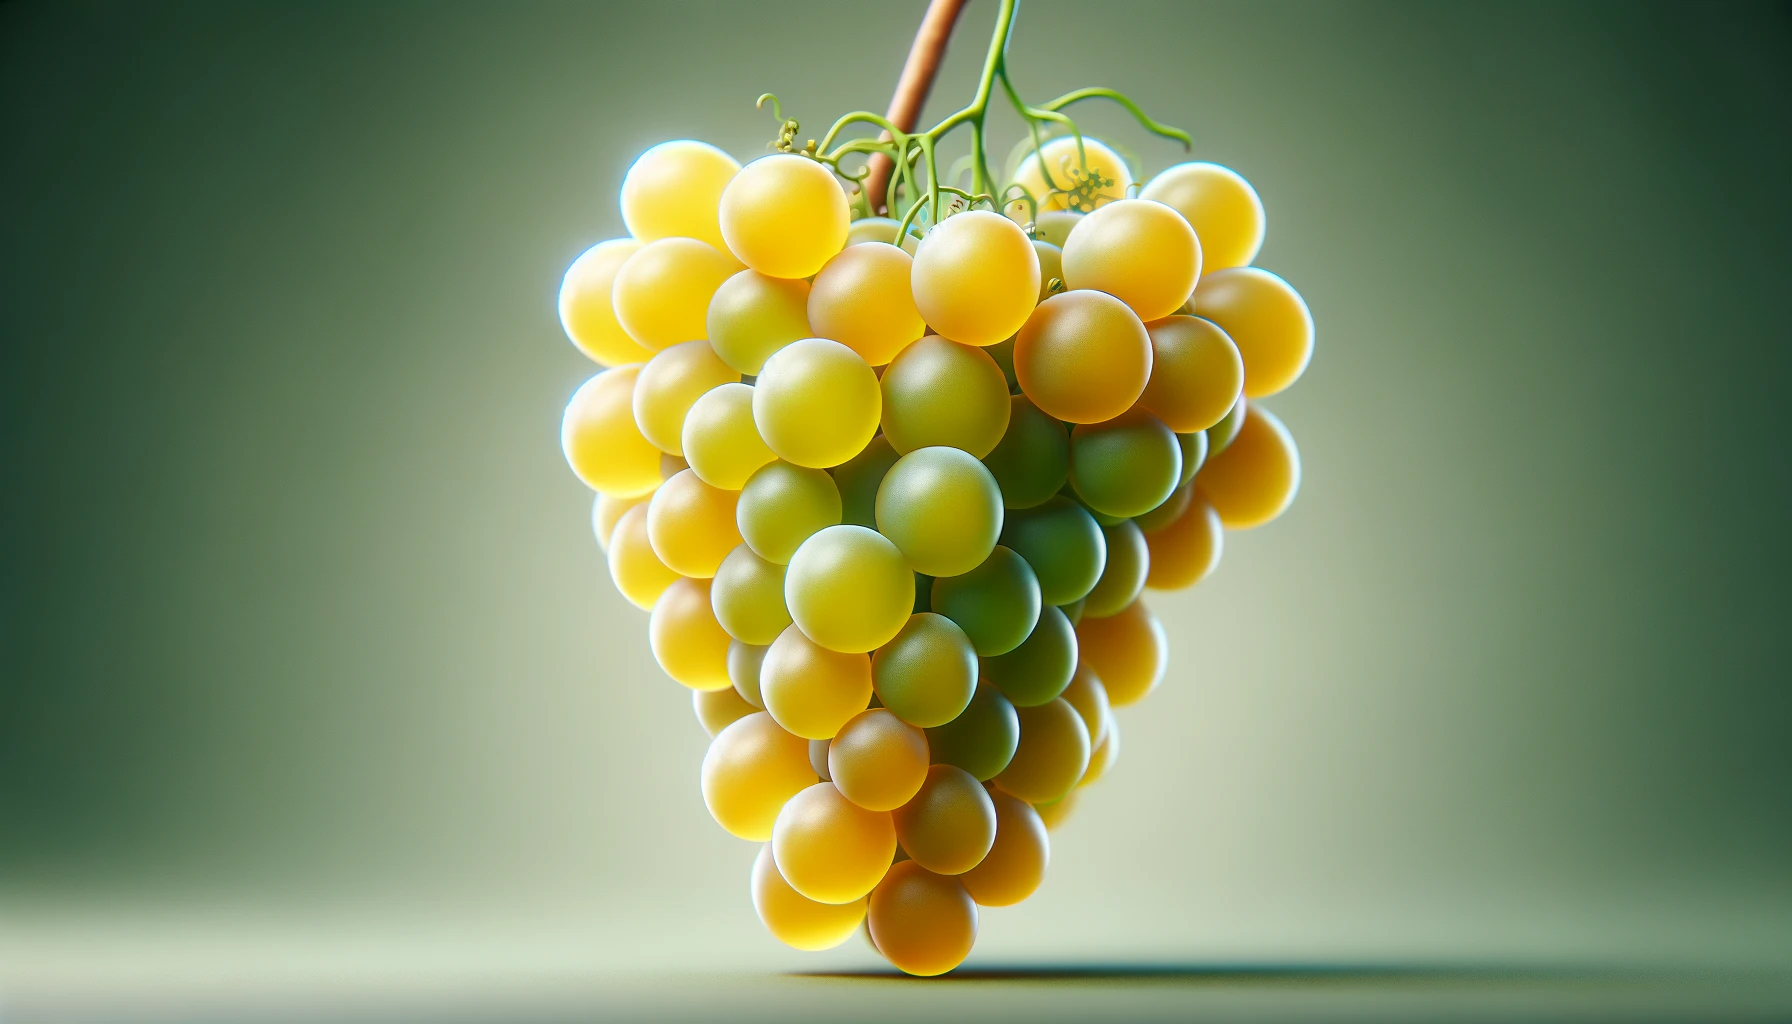 DALL·E 2024-05-23 10.55.22 - Photorealistic stock image of Chardonnay grapes, closely focused on a cluster of ripe Chardonnay grapes with golden yellow skins. The image should sho